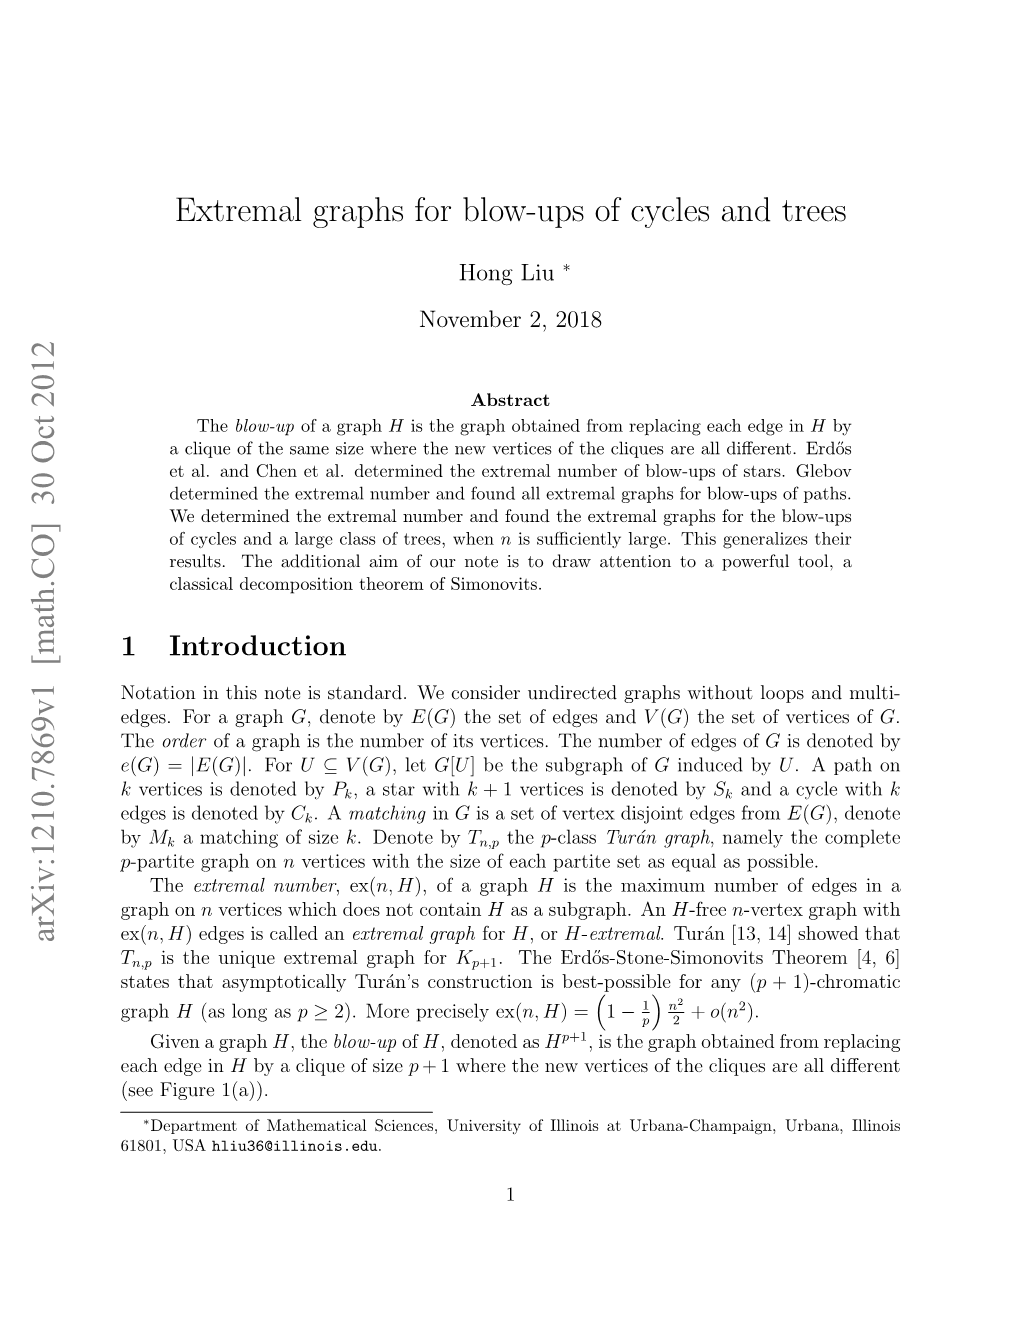 Extremal Graphs for Blow-Ups of Cycles and Trees Arxiv:1210.7869V1 [Math